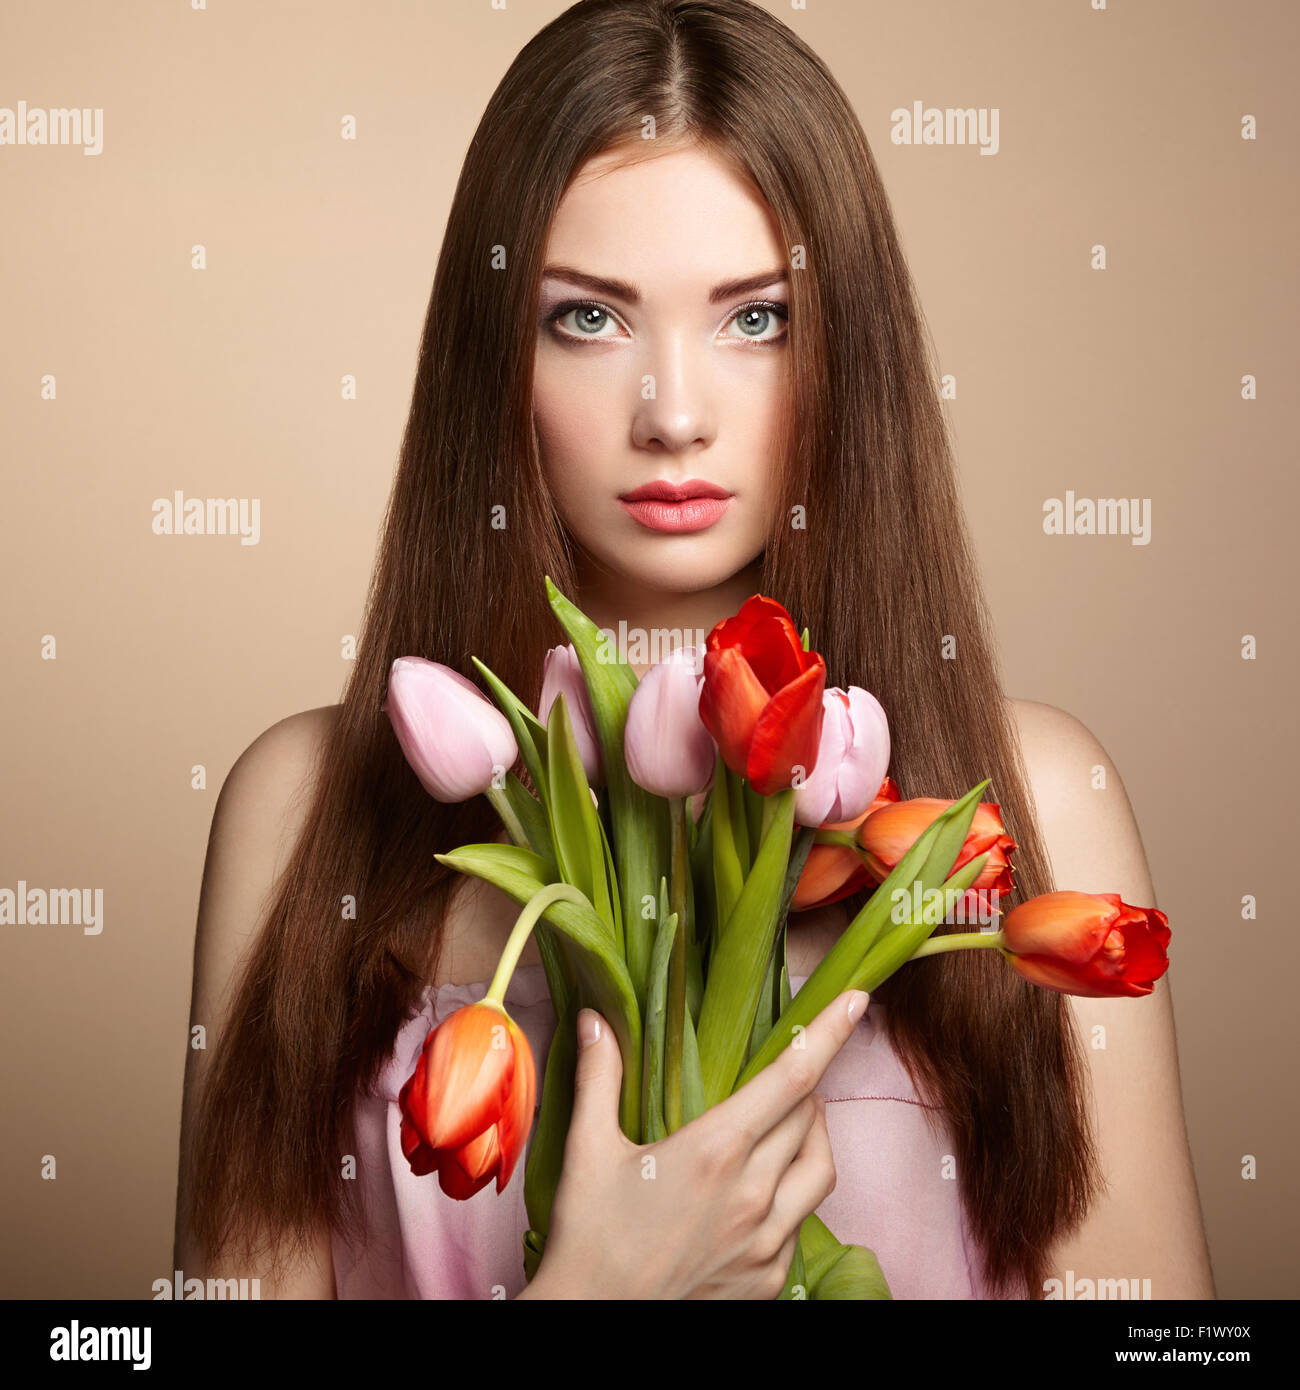 Portrait of beautiful dark-haired woman with flowers. Fashion photo Stock Photo